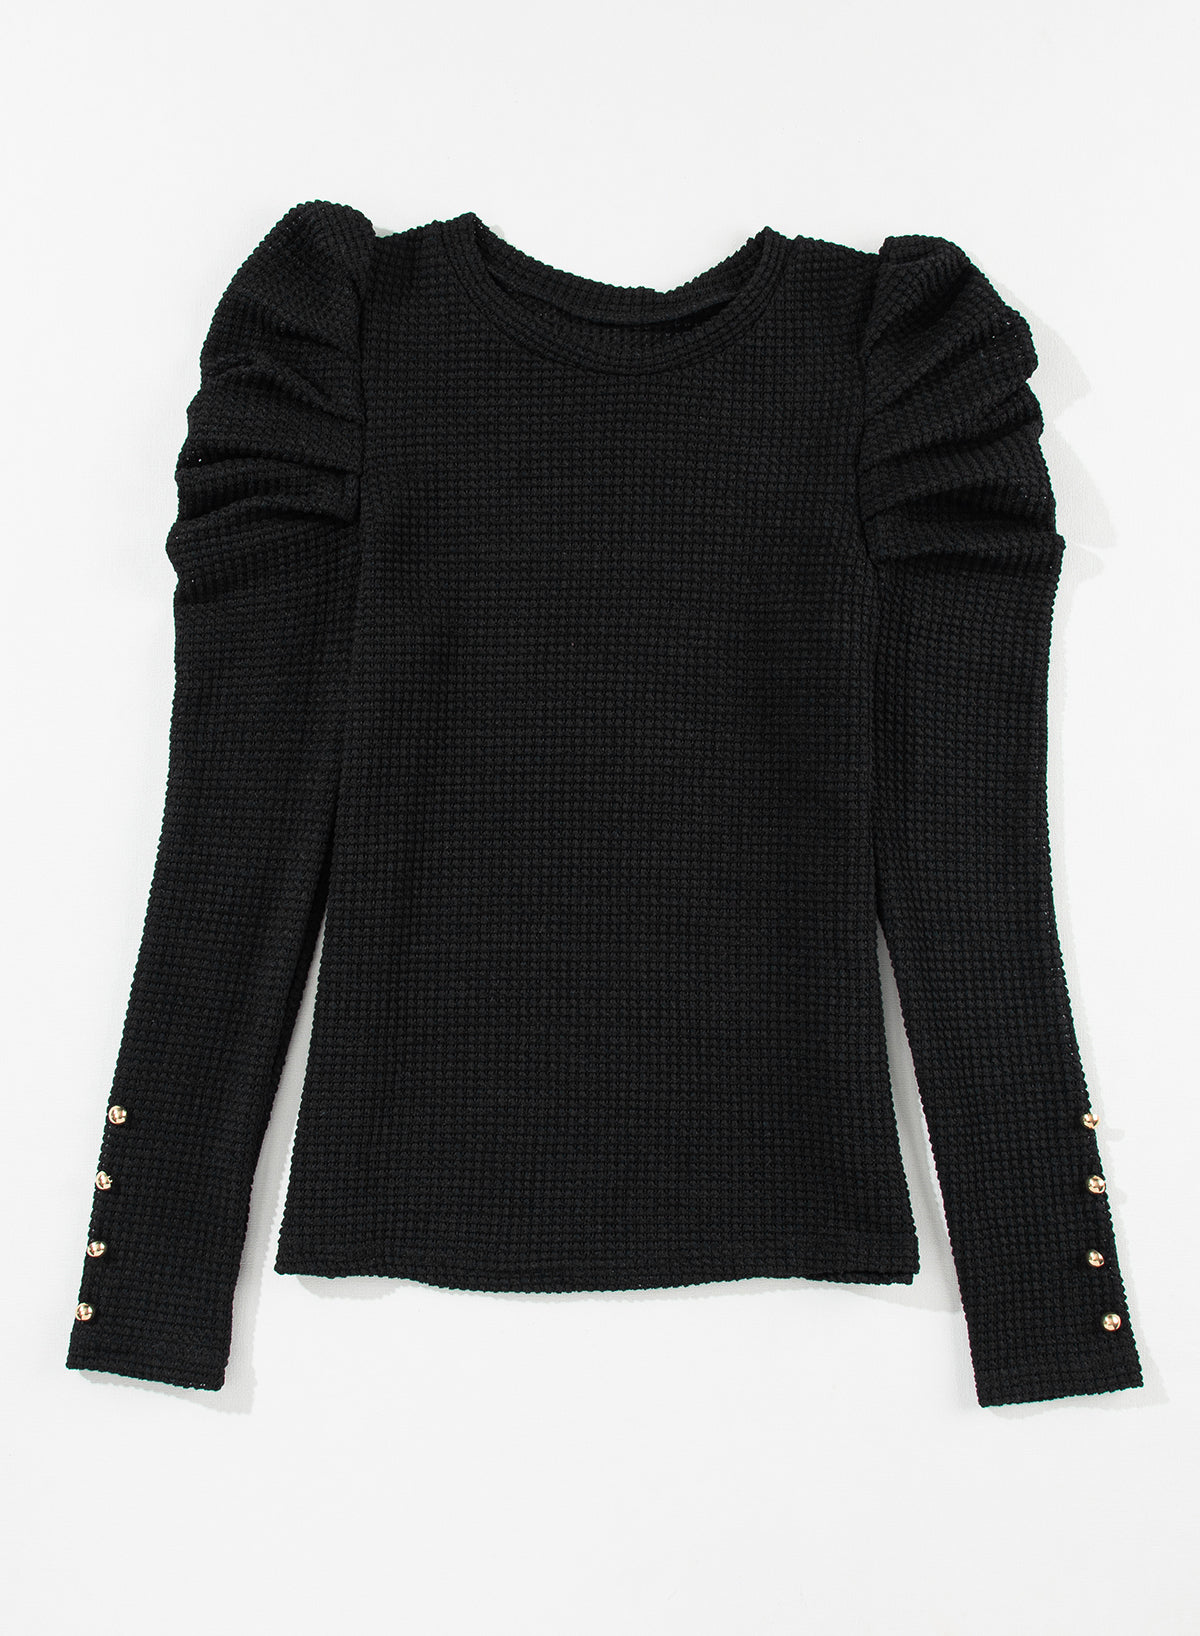 Black Solid Color Textured Buttoned Gigot Sleeve Top